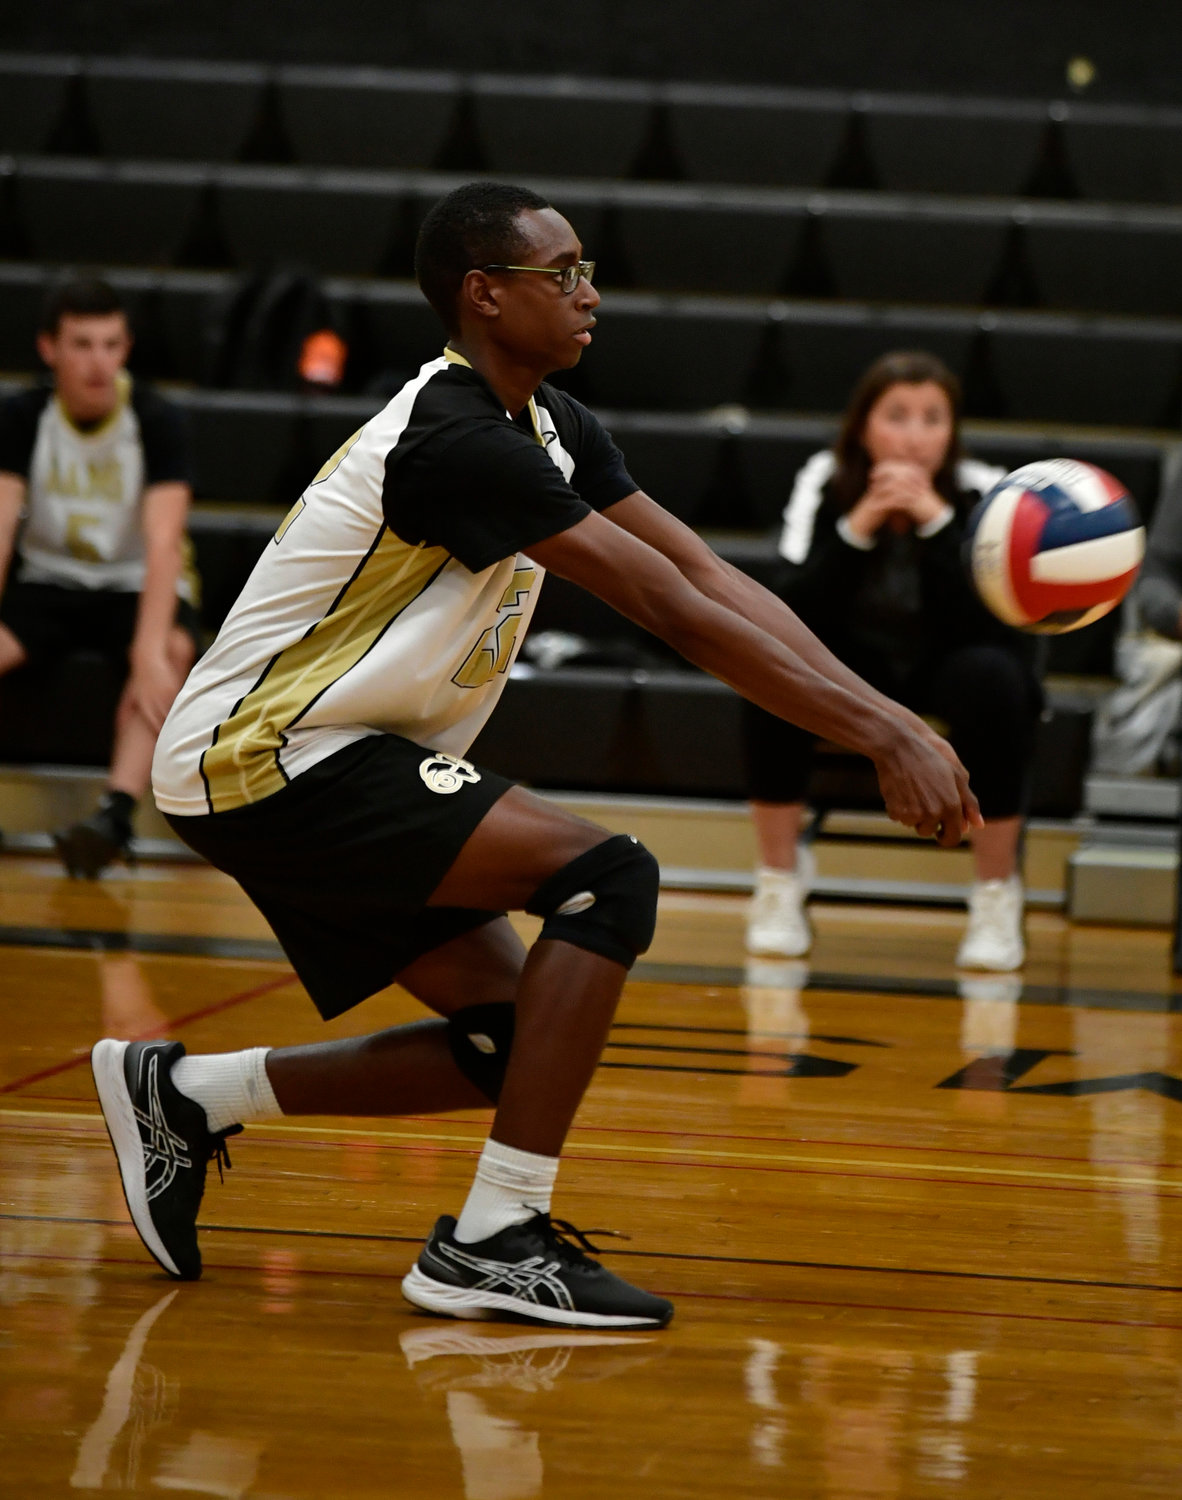 Aden Palmer is part of a large junior class comprising the Rams’ roster and contributing 7 kills per match.